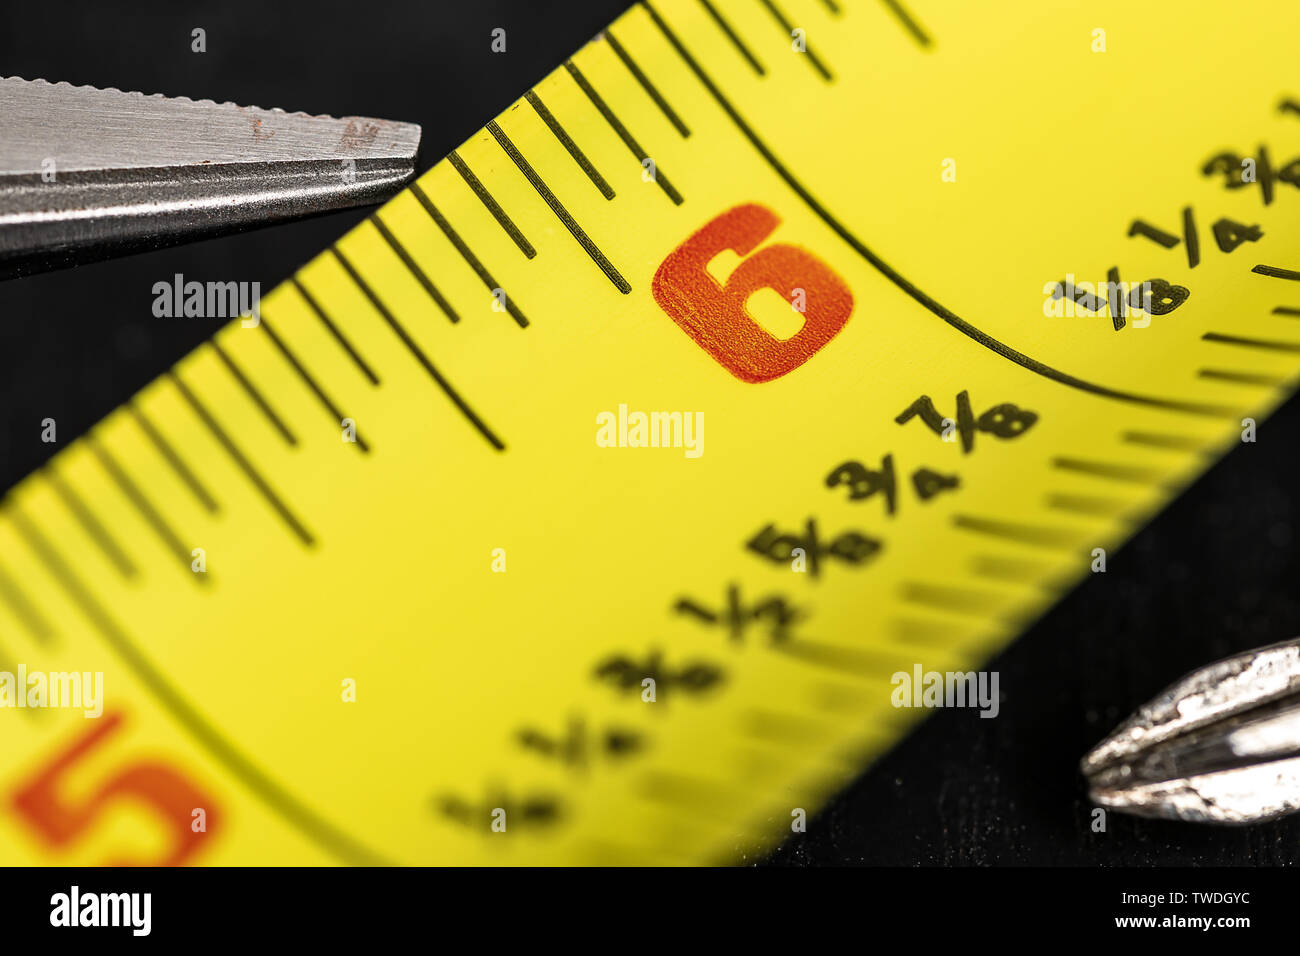 A macro image of a yellow Tape Measure at the 6 inch mark, 1/8 inch hashes are labeled and center of focus in center frame a needle nose plier and a s Stock Photo